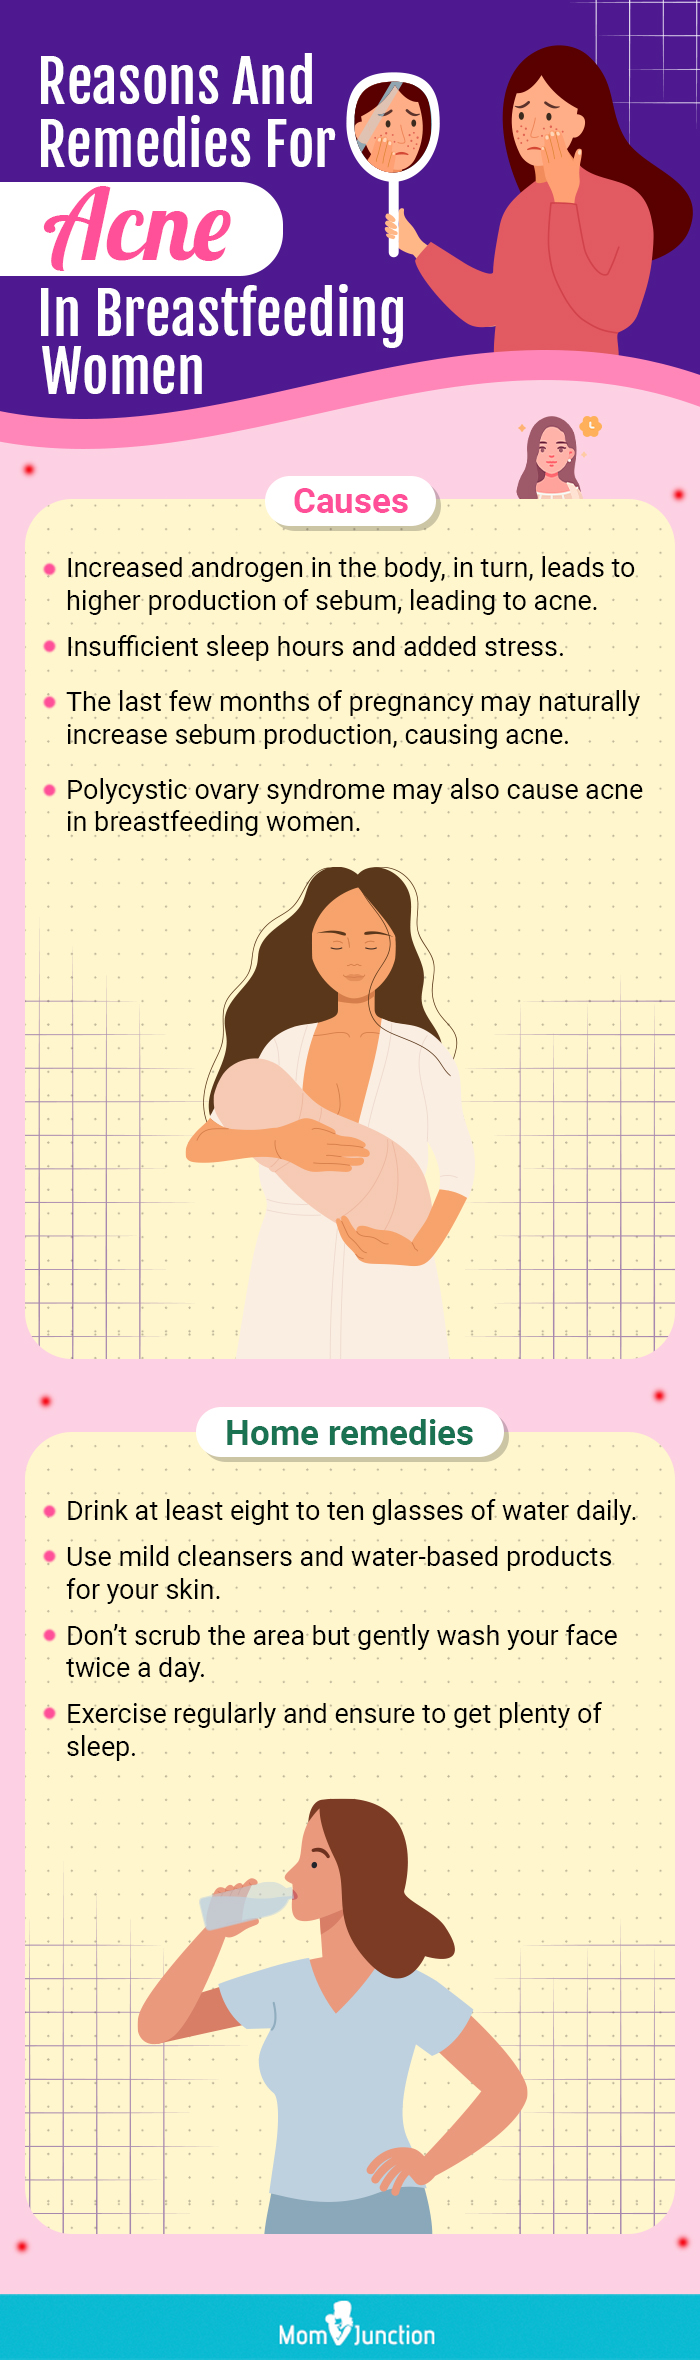 reasons and remedies for acne in breastfeeding women (infographic)